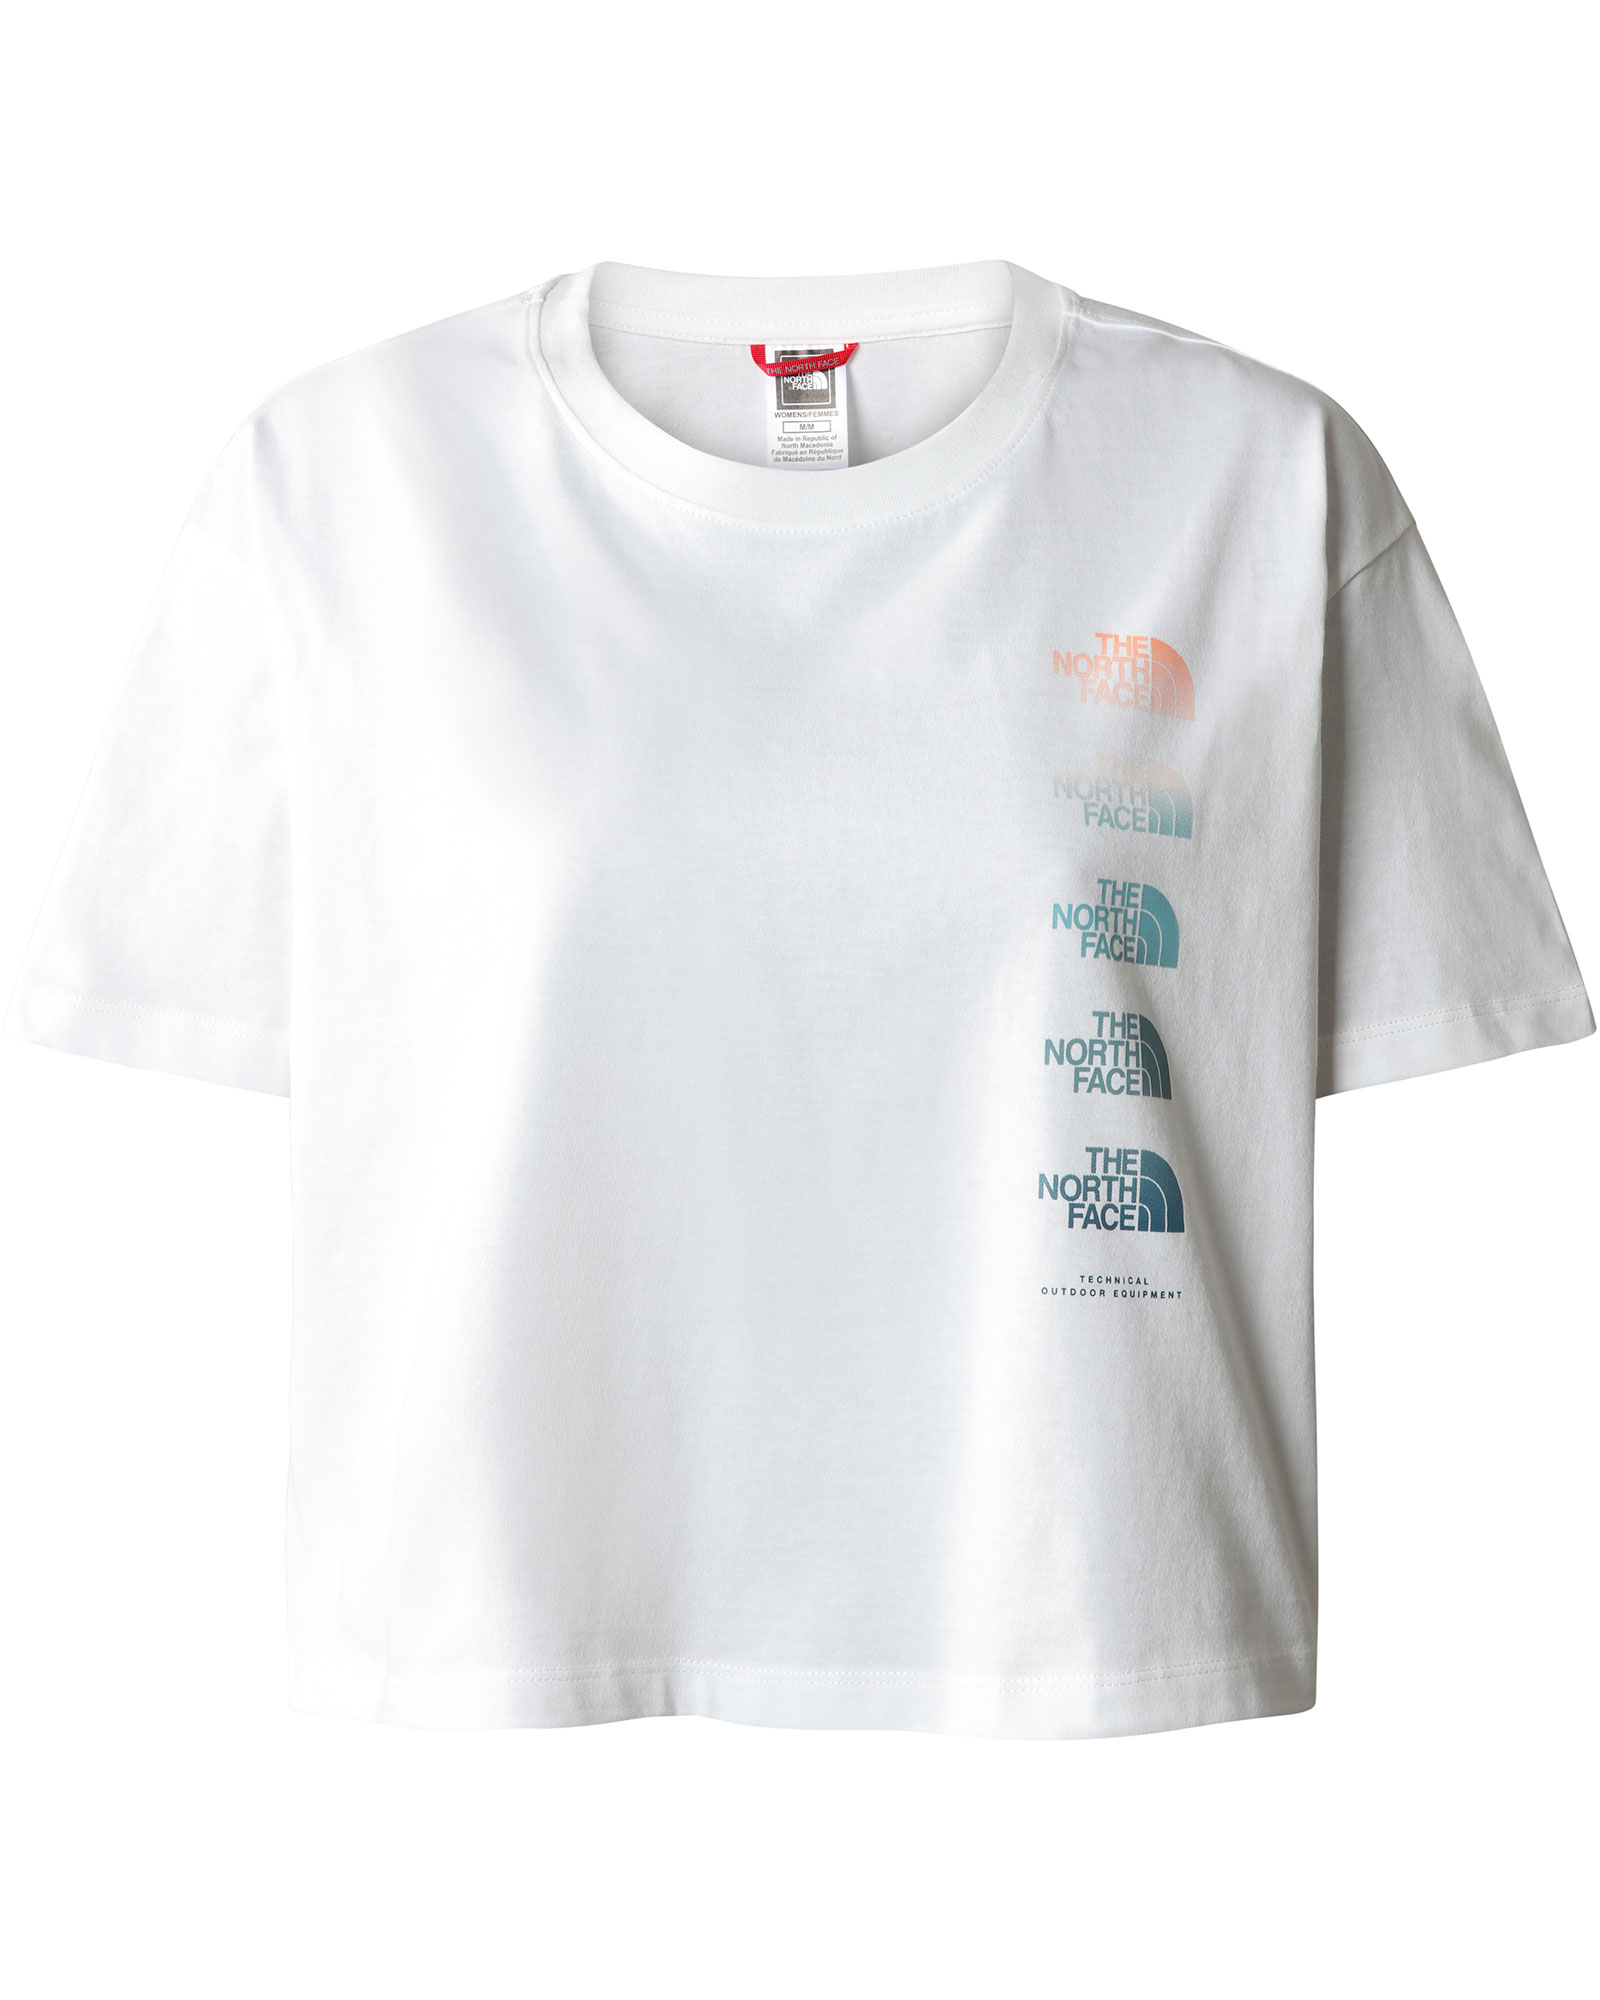 The North Face Women’s D2 Graphic Crop T Shirt - Gardenia White L